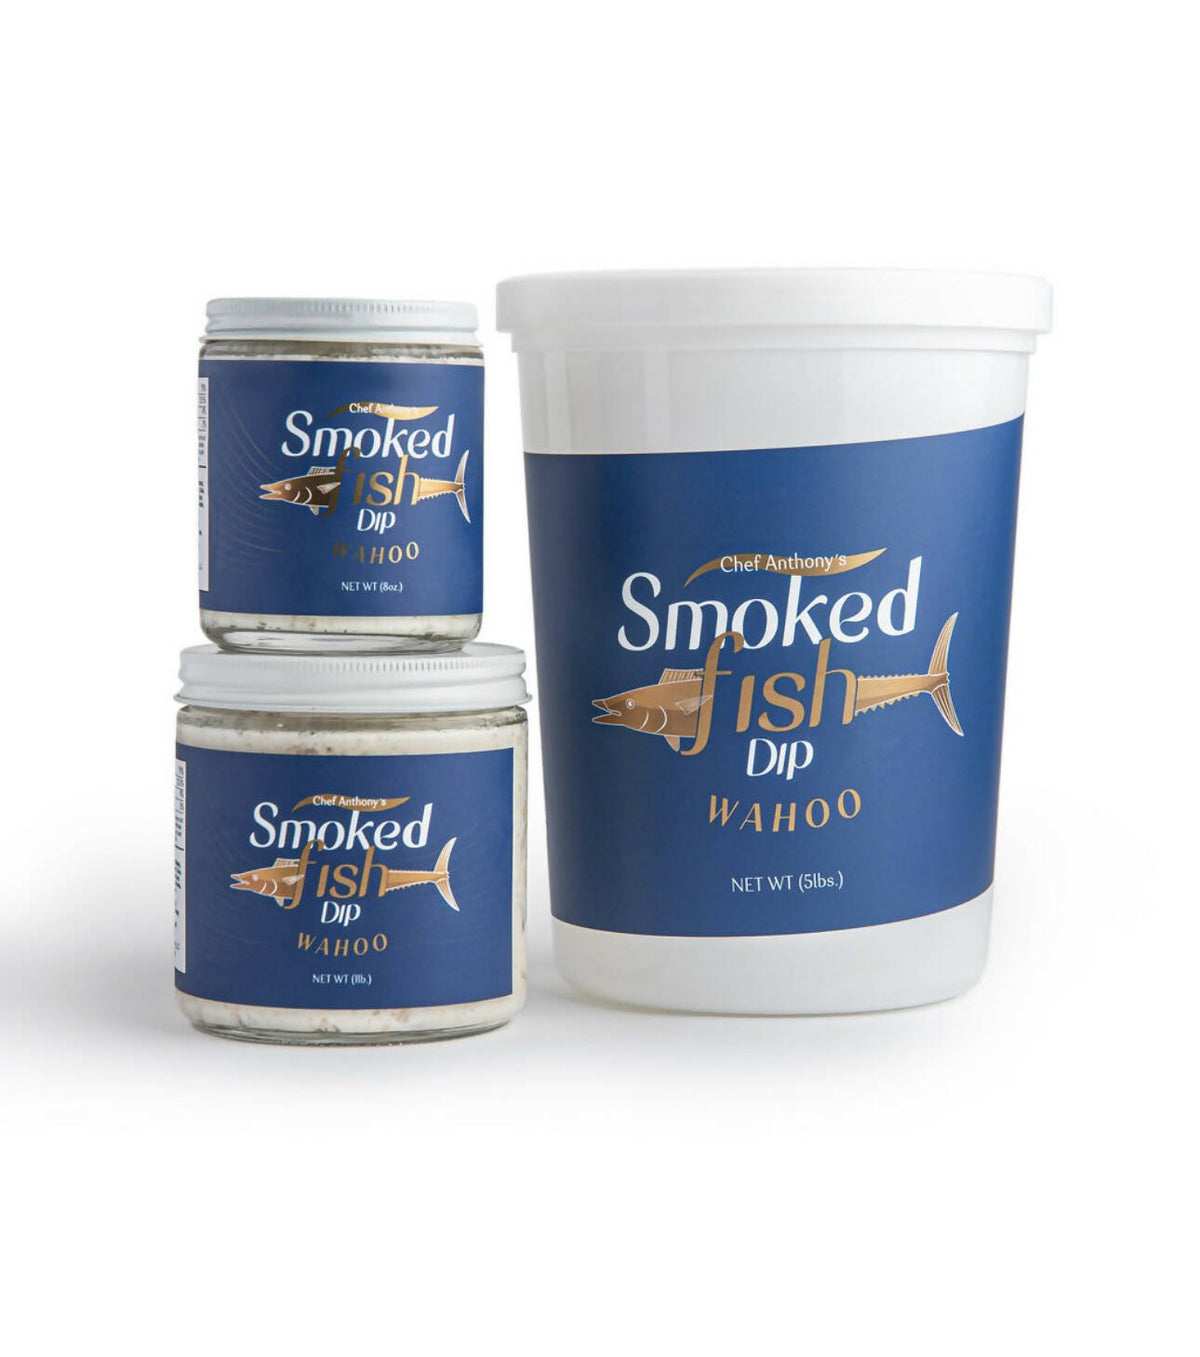 Chef Anthony's Smoked Fish Dip Buckets - 1 bucket x 5 LB by Farm2Me